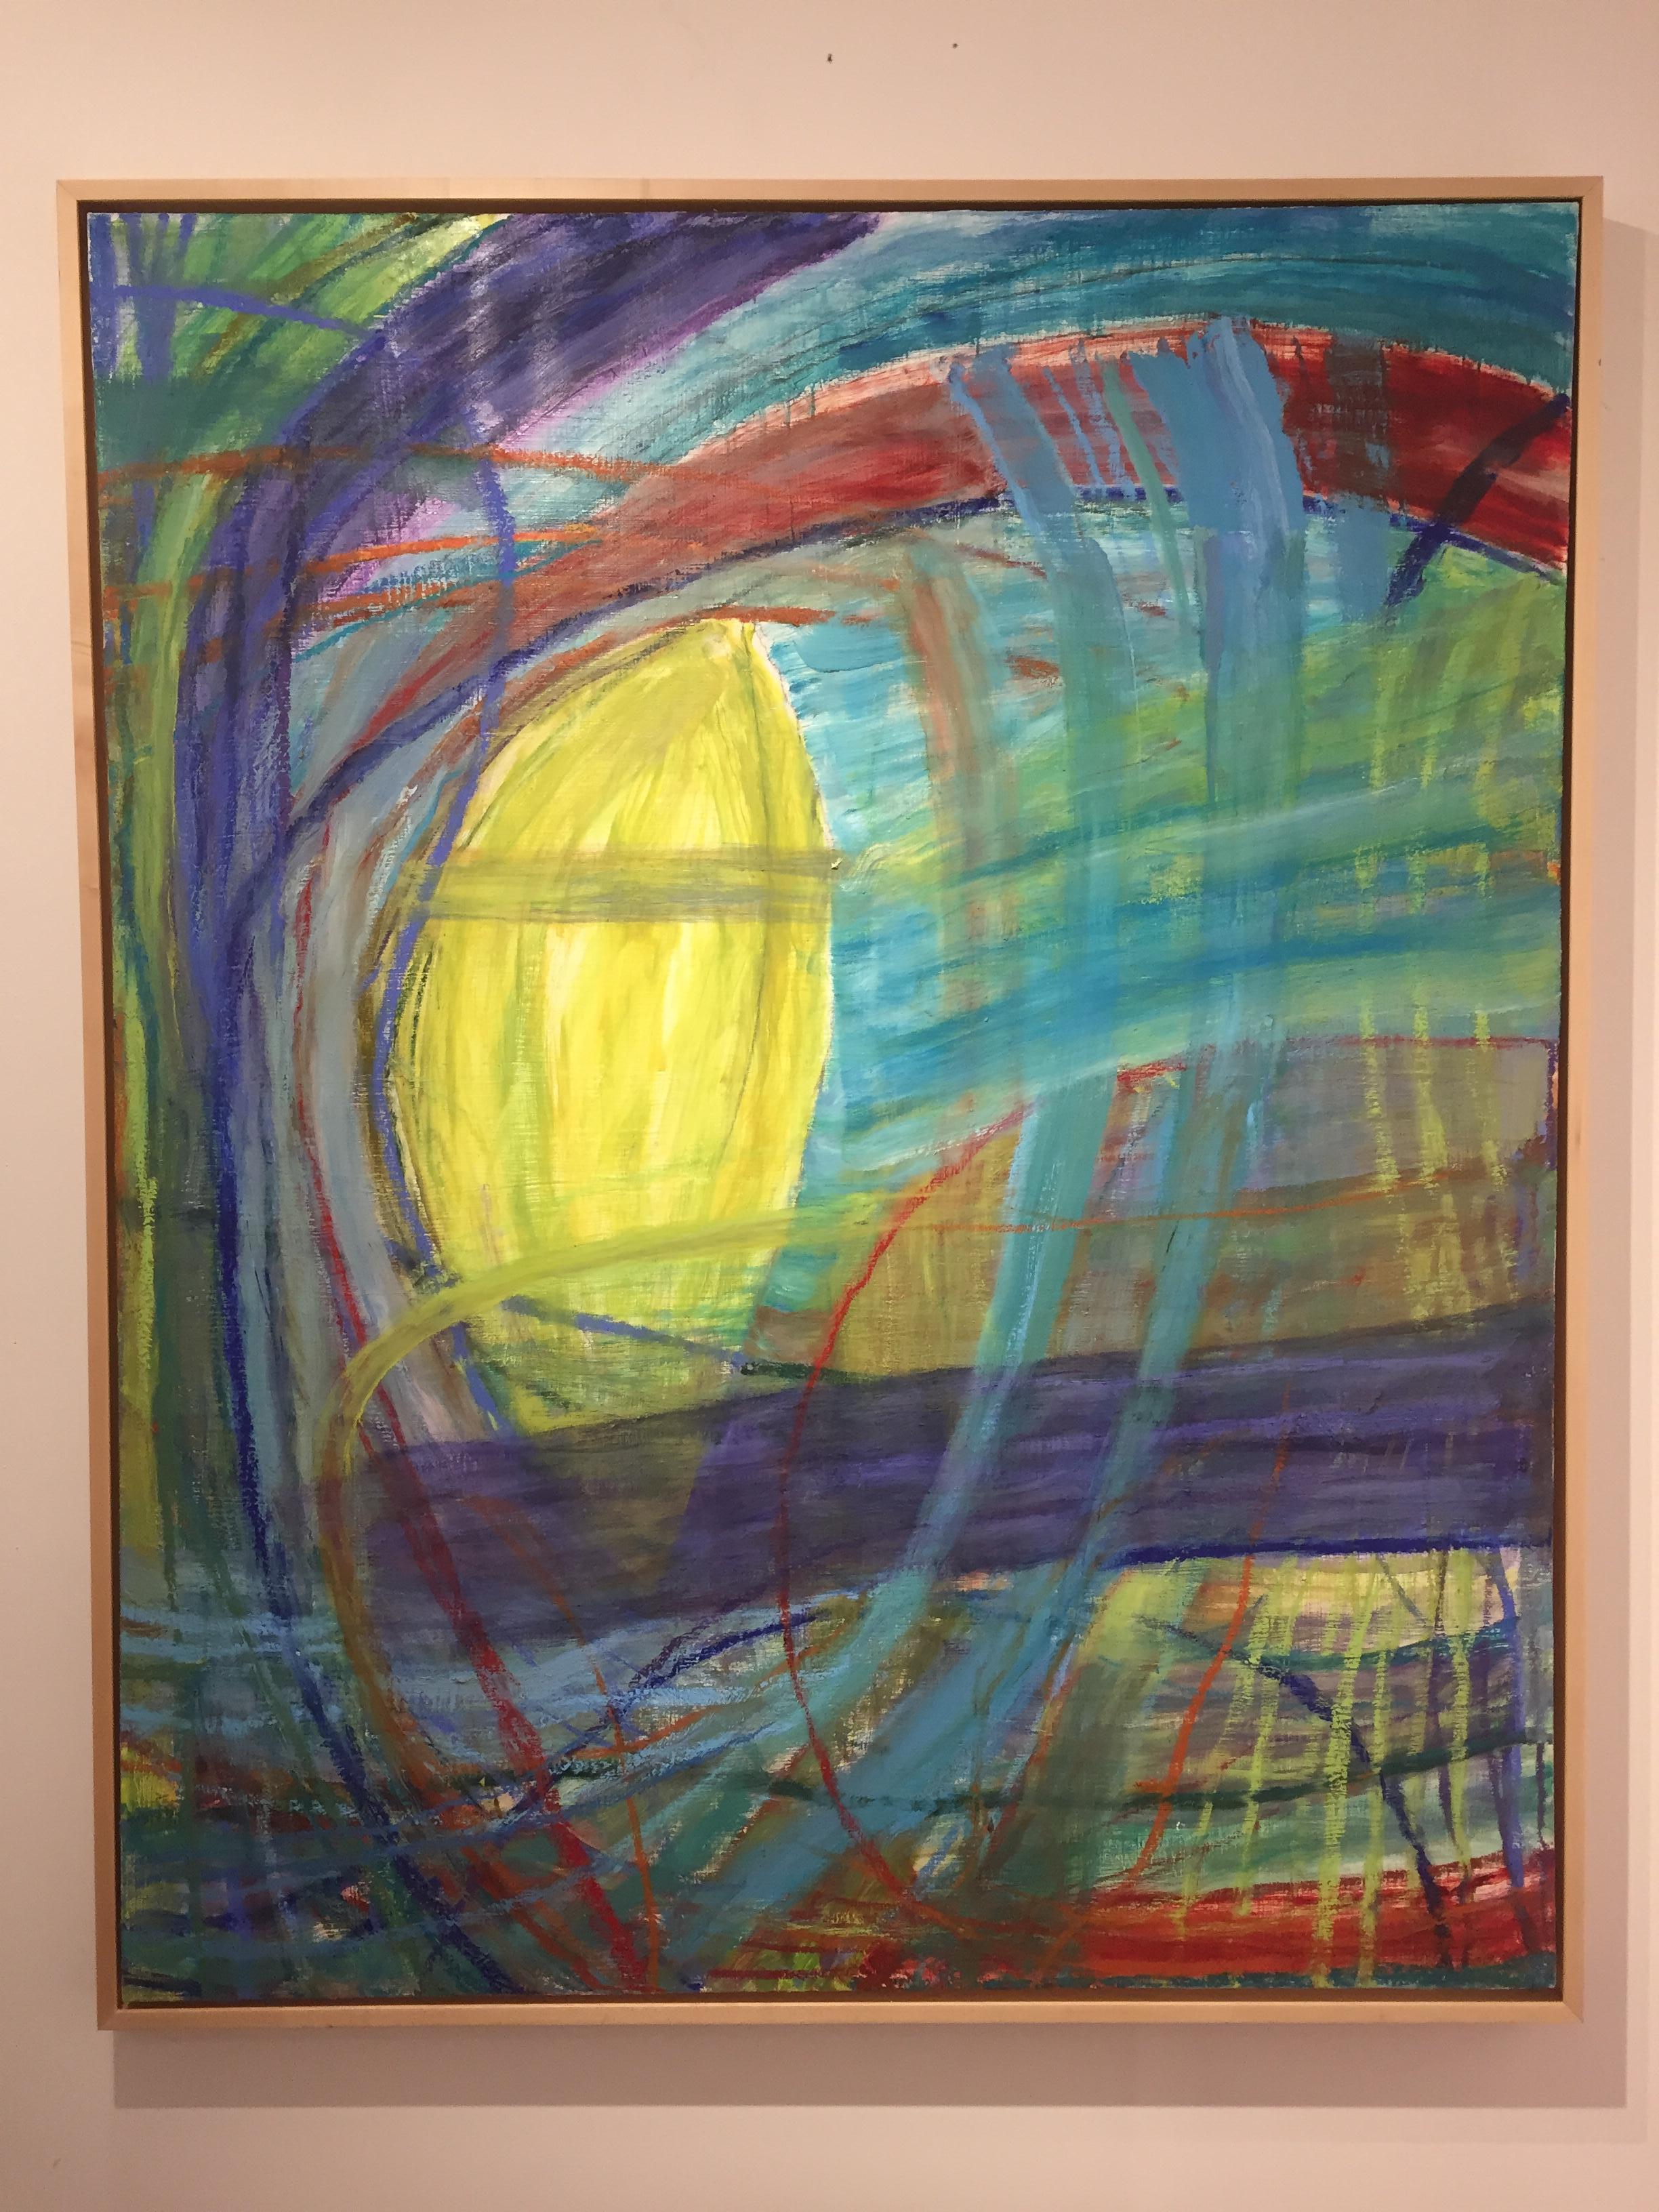 Abstract artwork dominated by lime green and various shades of blue. 